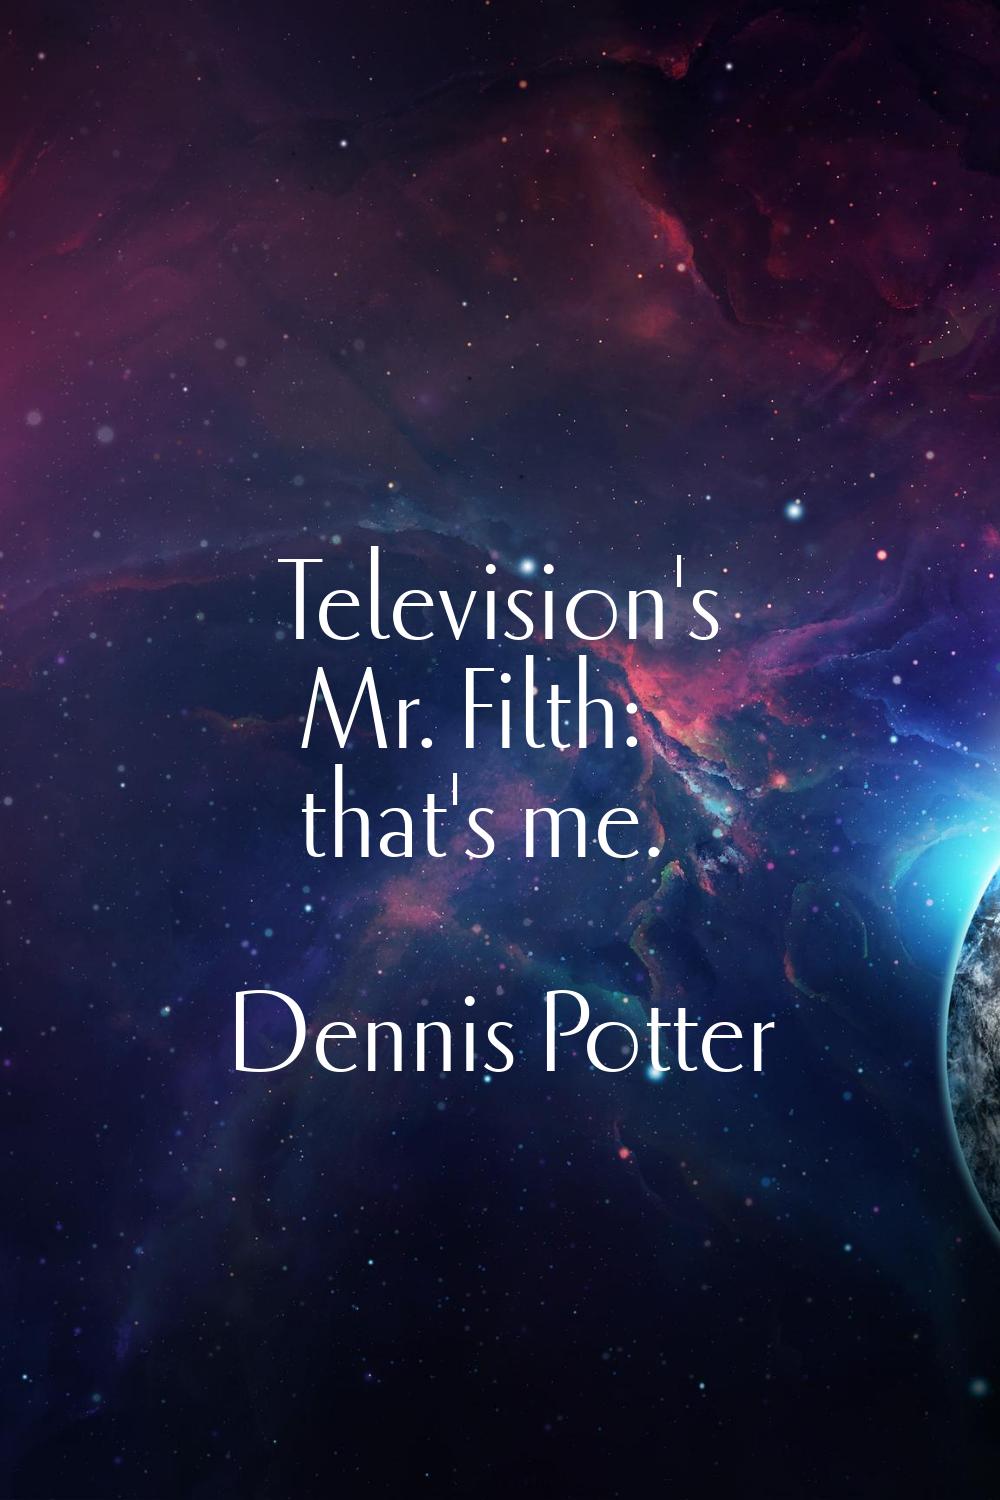 Television's Mr. Filth: that's me.